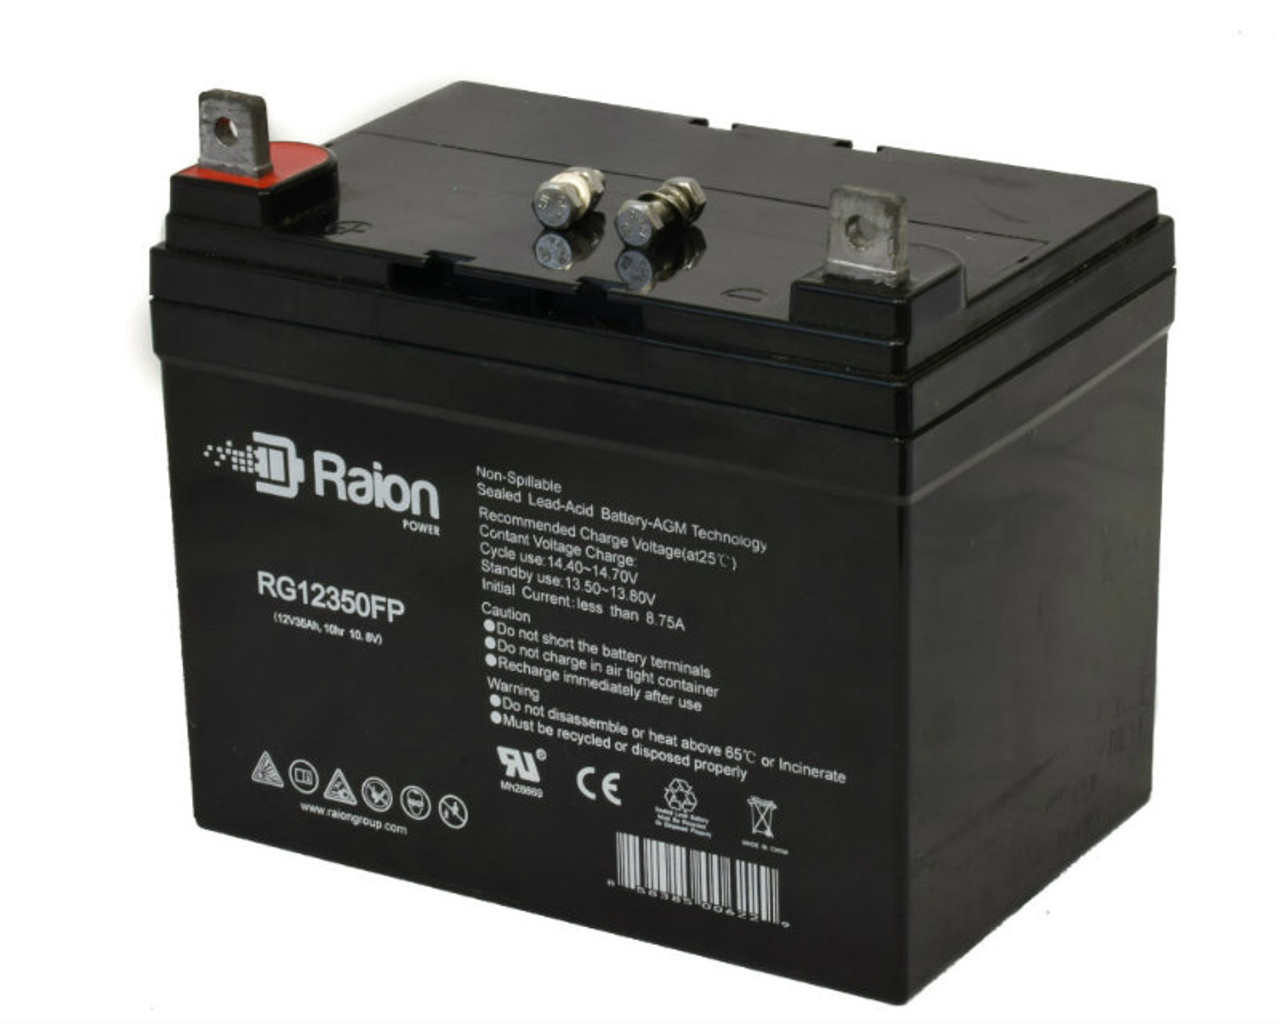 Raion Power Replacement 12V 35Ah Battery for CSB GH12340 - 1 Pack